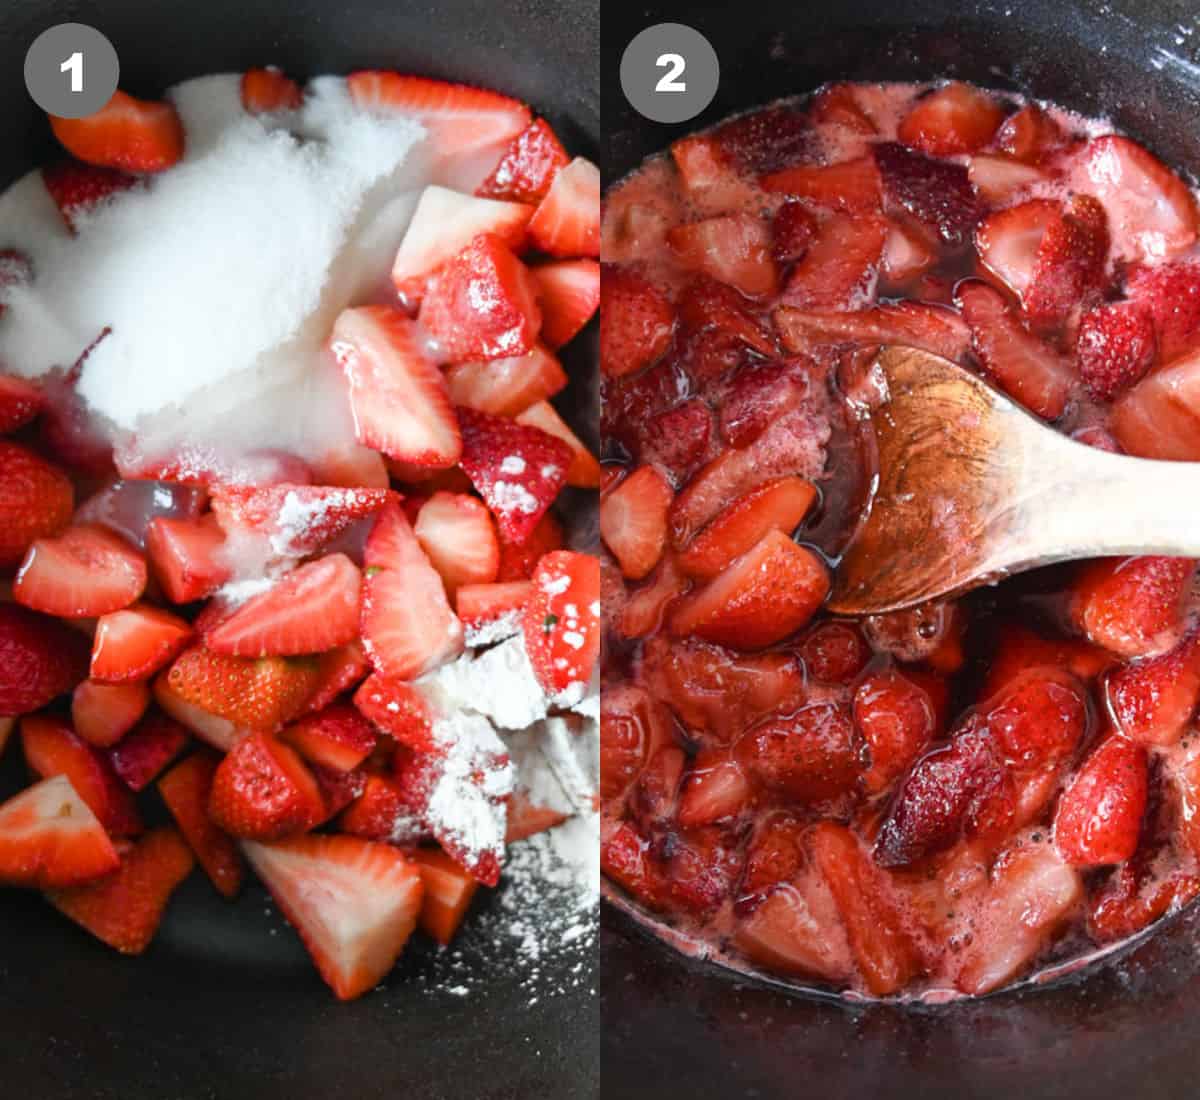 Diced strawberries in a pot with sugar and lemon juice and simmered.